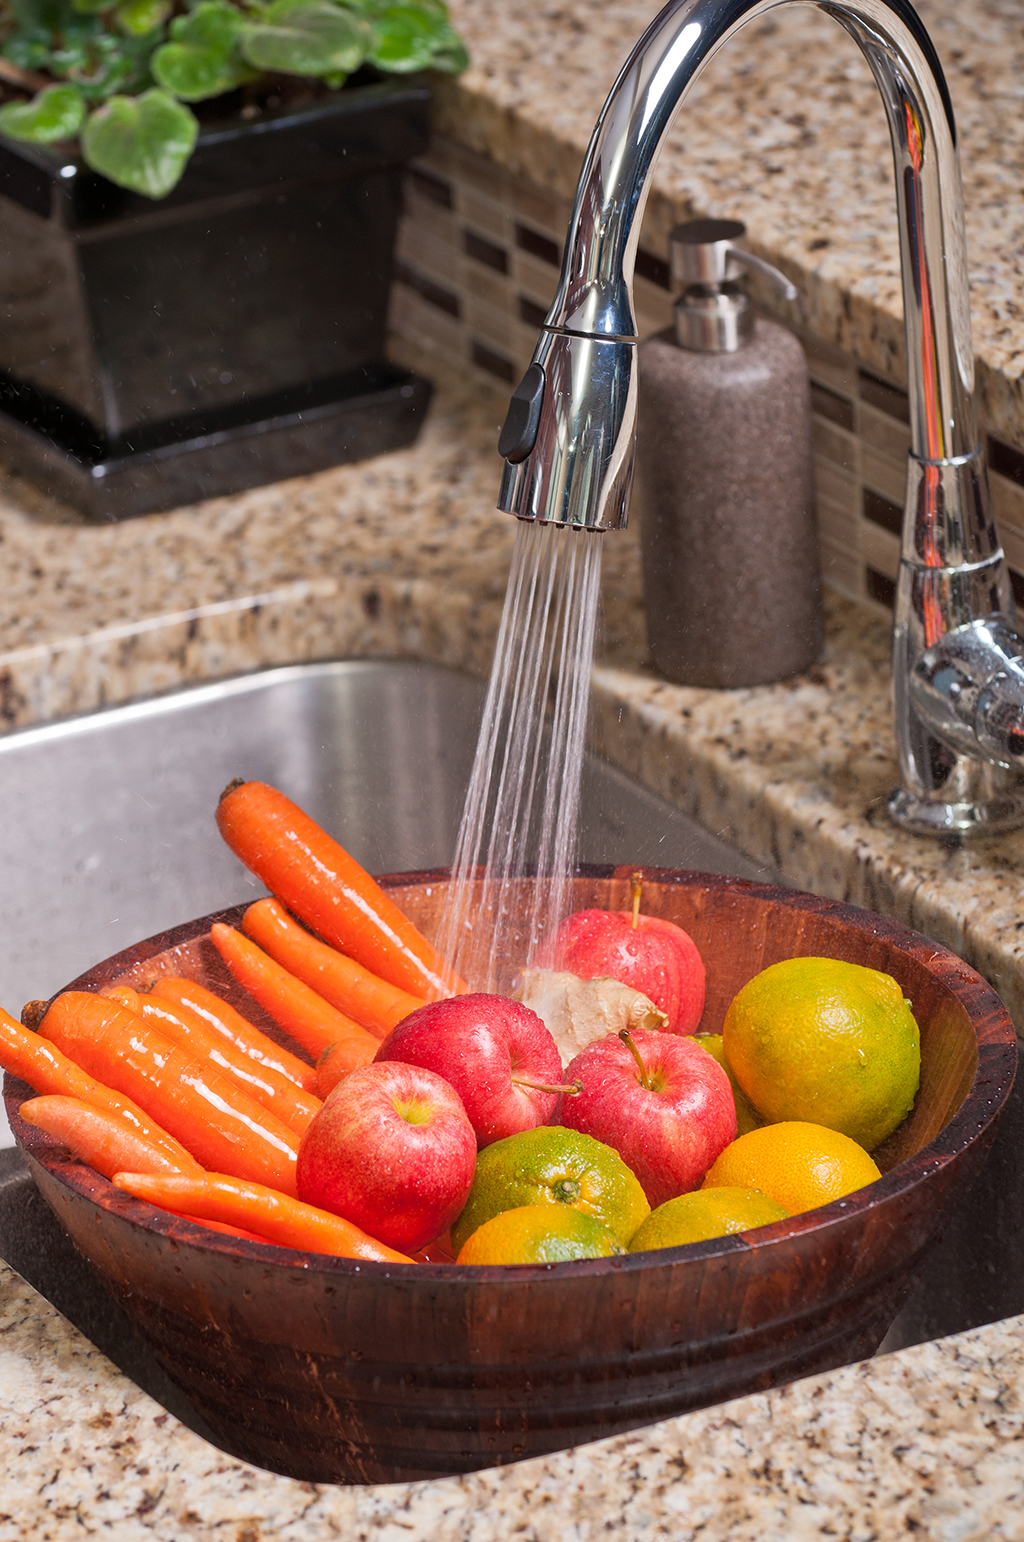 Plumbing Service To Increase Convenience In Your Kitchen | Katy, TX